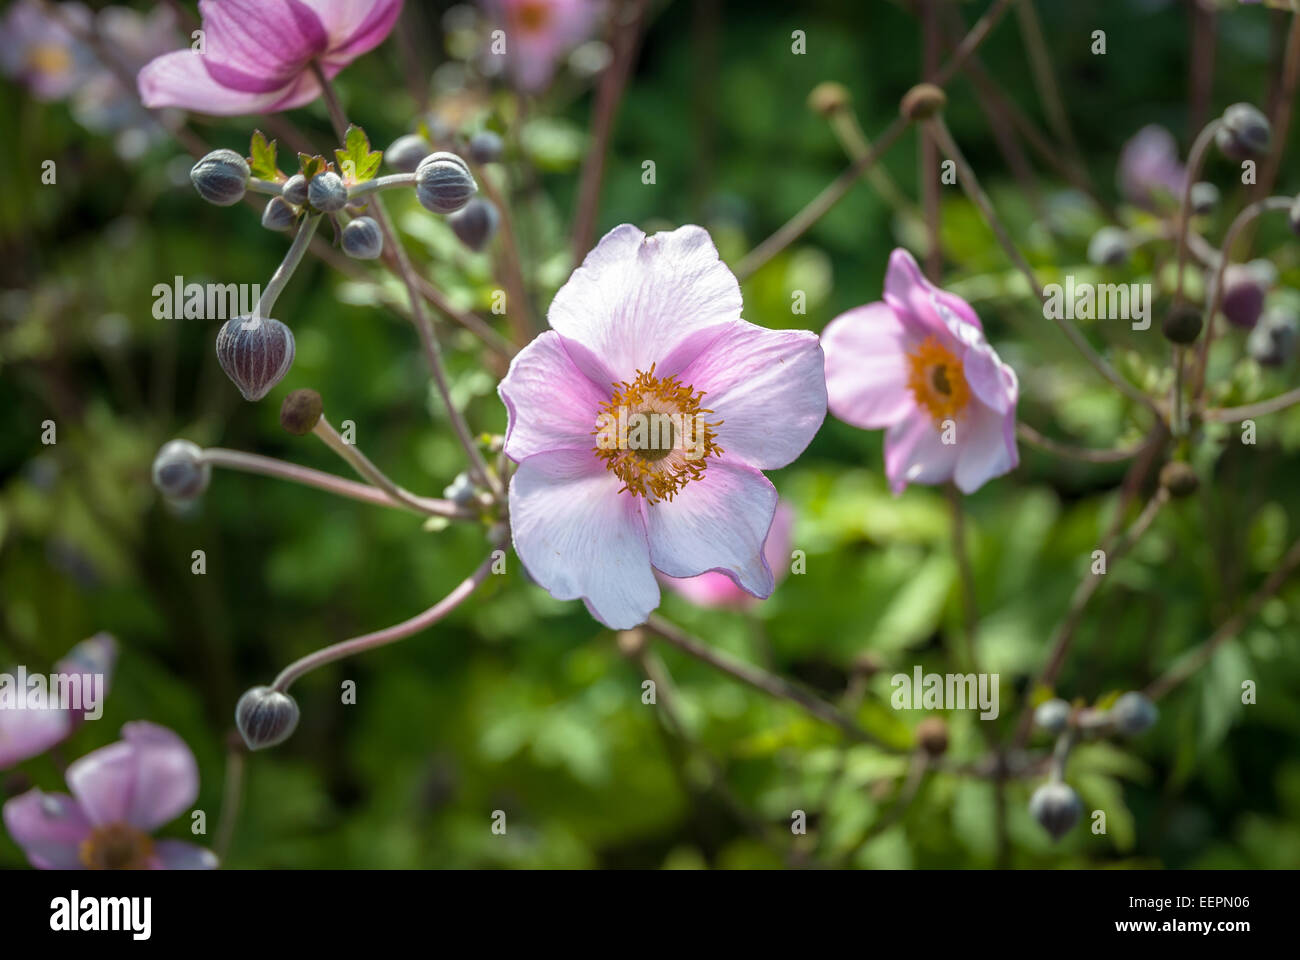 'September Charm' Anemone is an herbaceous perennial Stock Photo